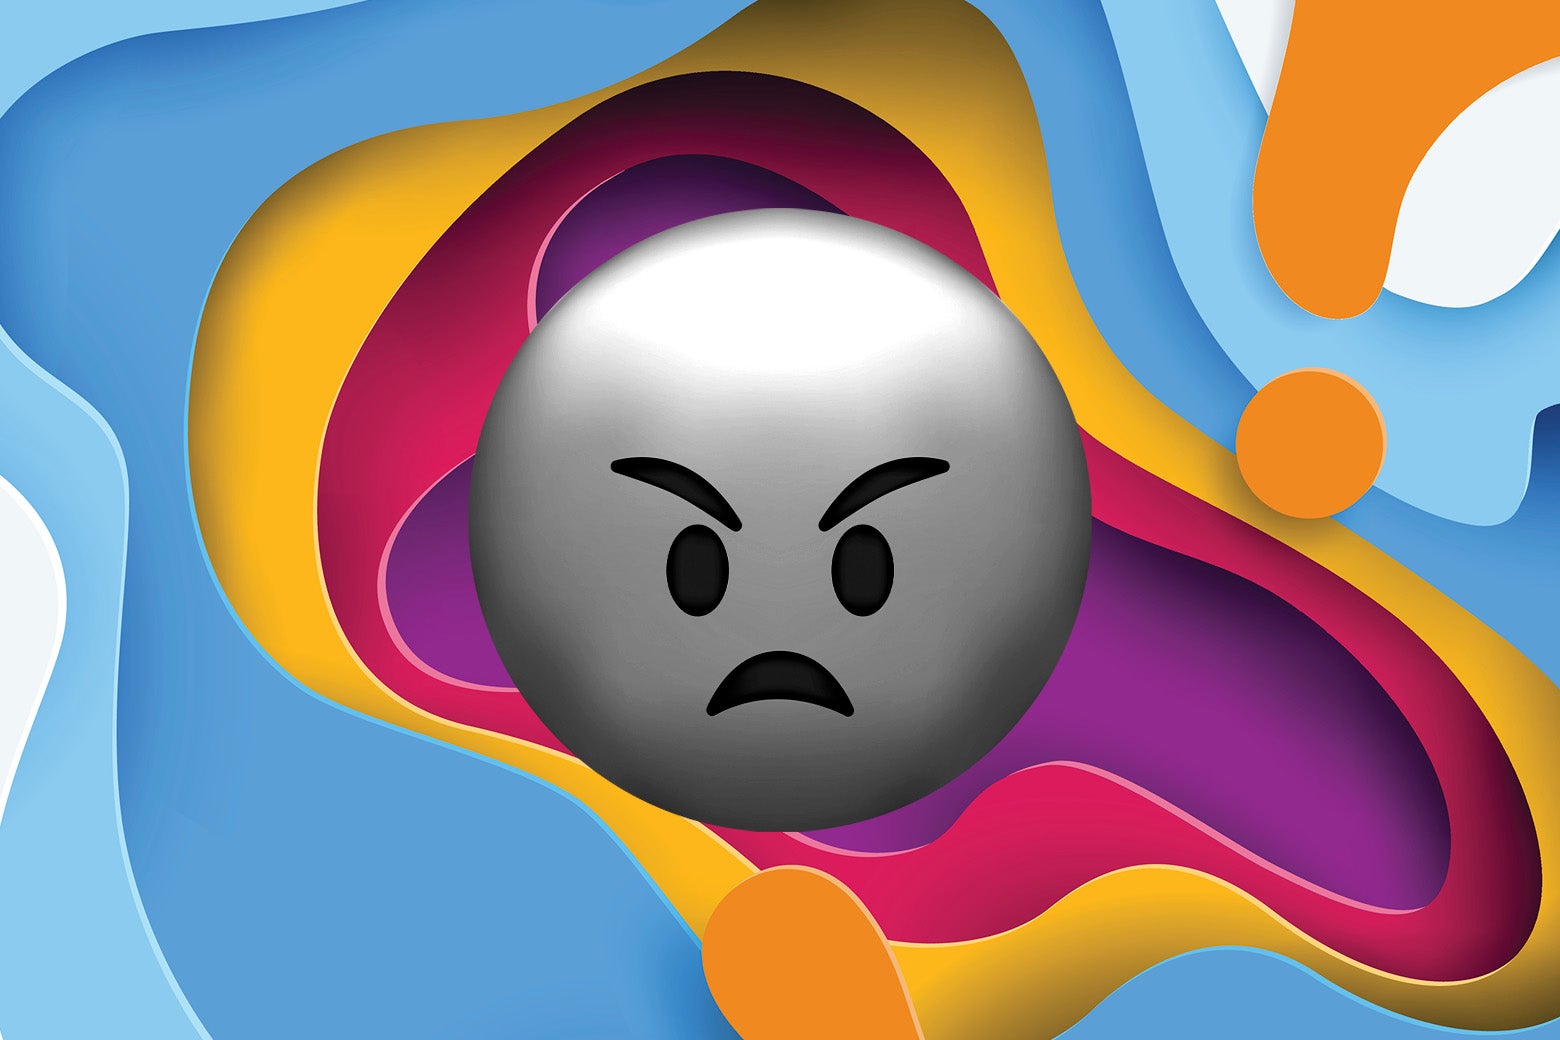 An enhanced angry emoji frowns against the colorful "One Thing" theme.